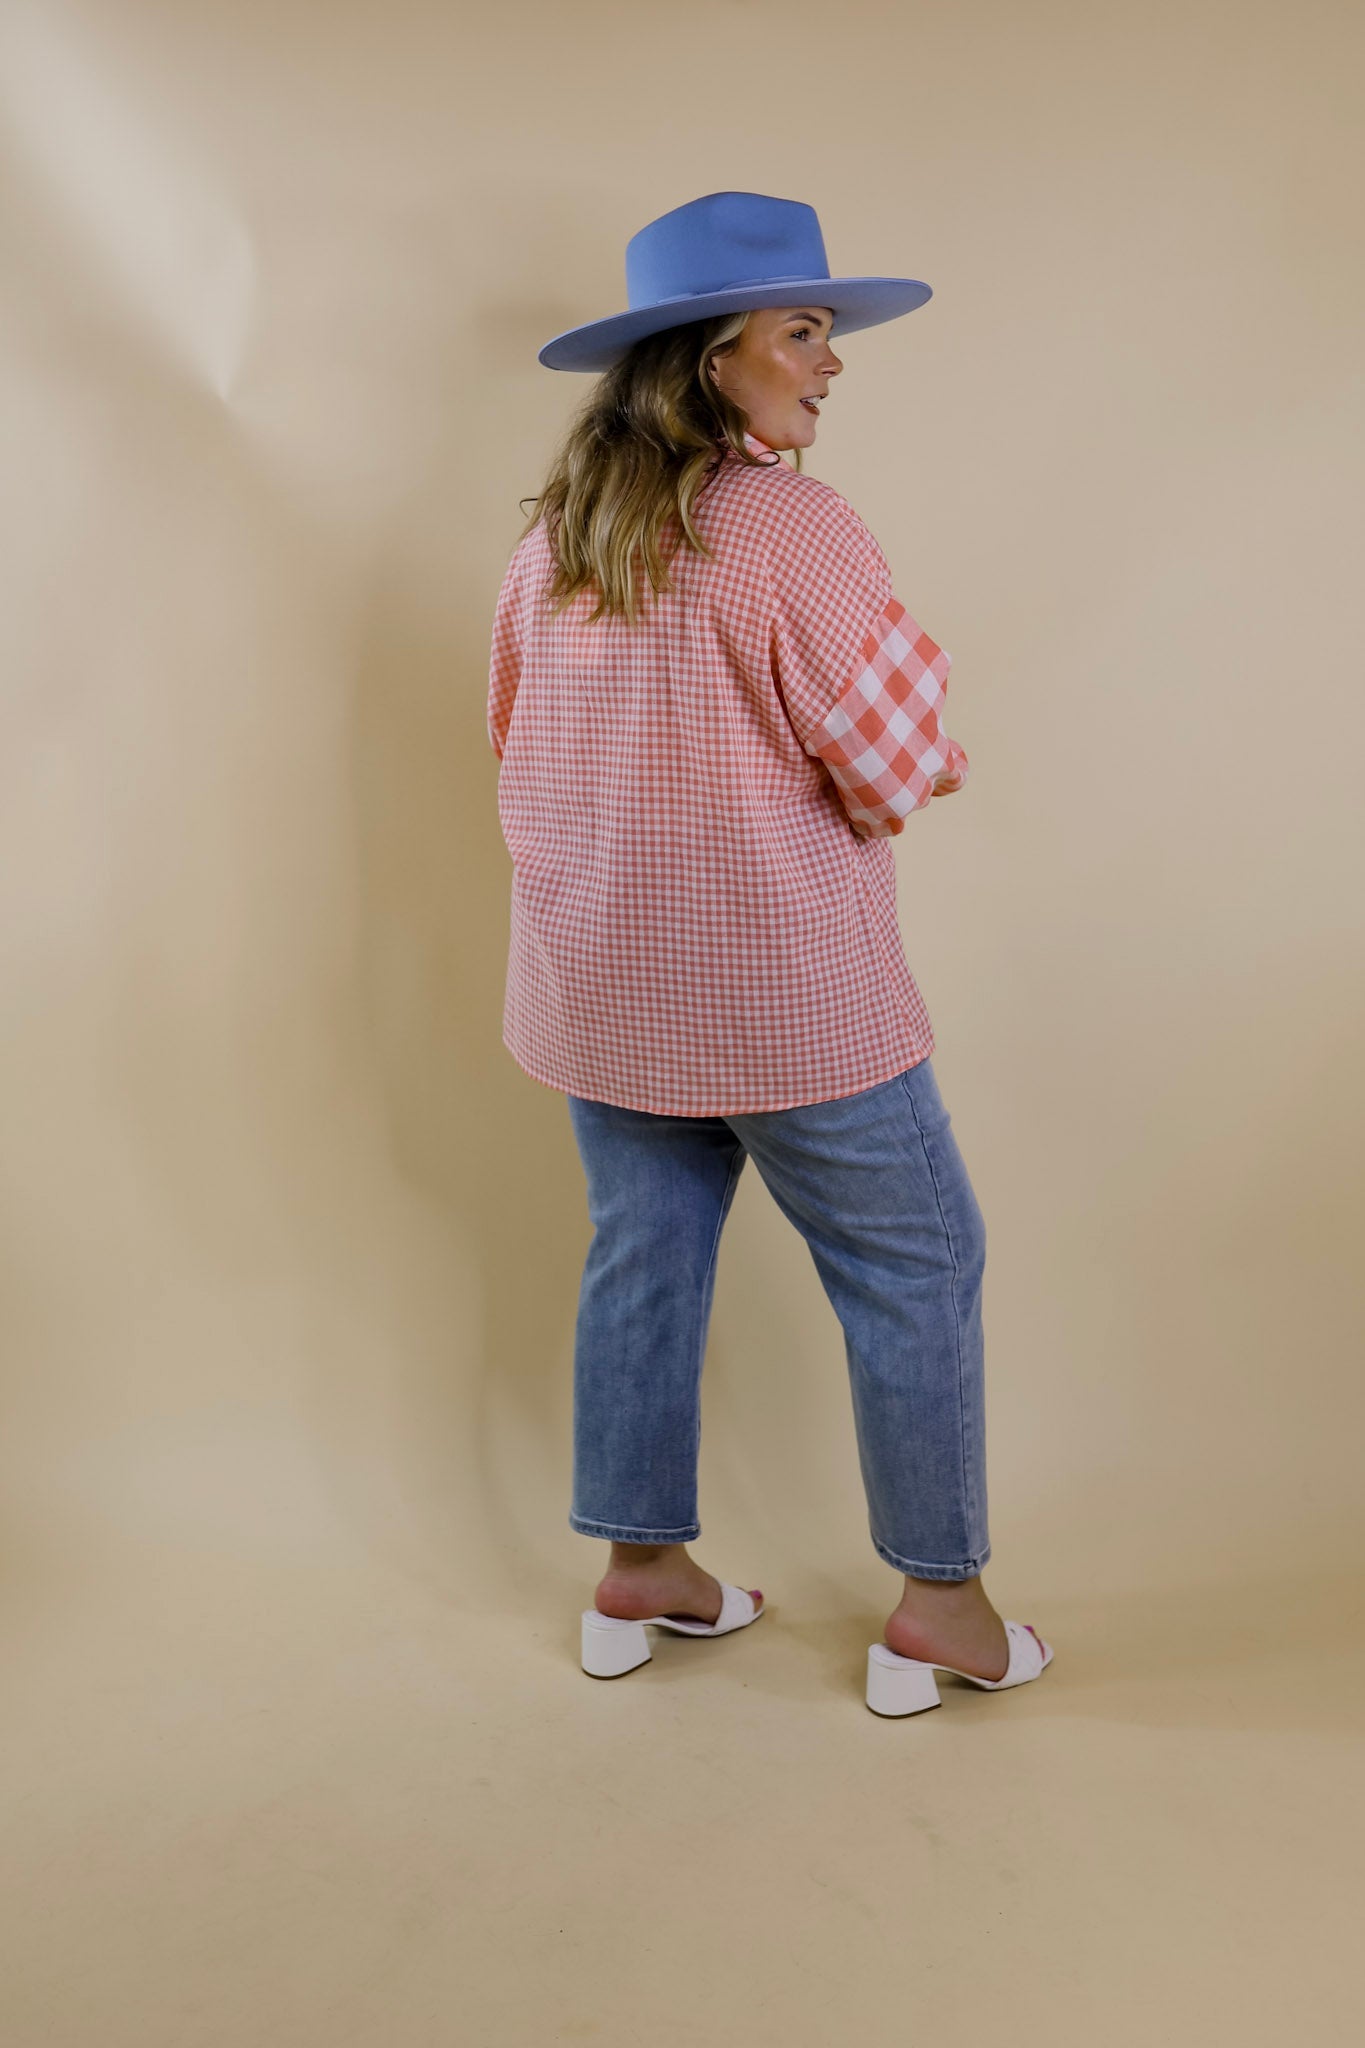 Waiting For You Mix Plaid Button Up Top in Coral Orange - Giddy Up Glamour Boutique